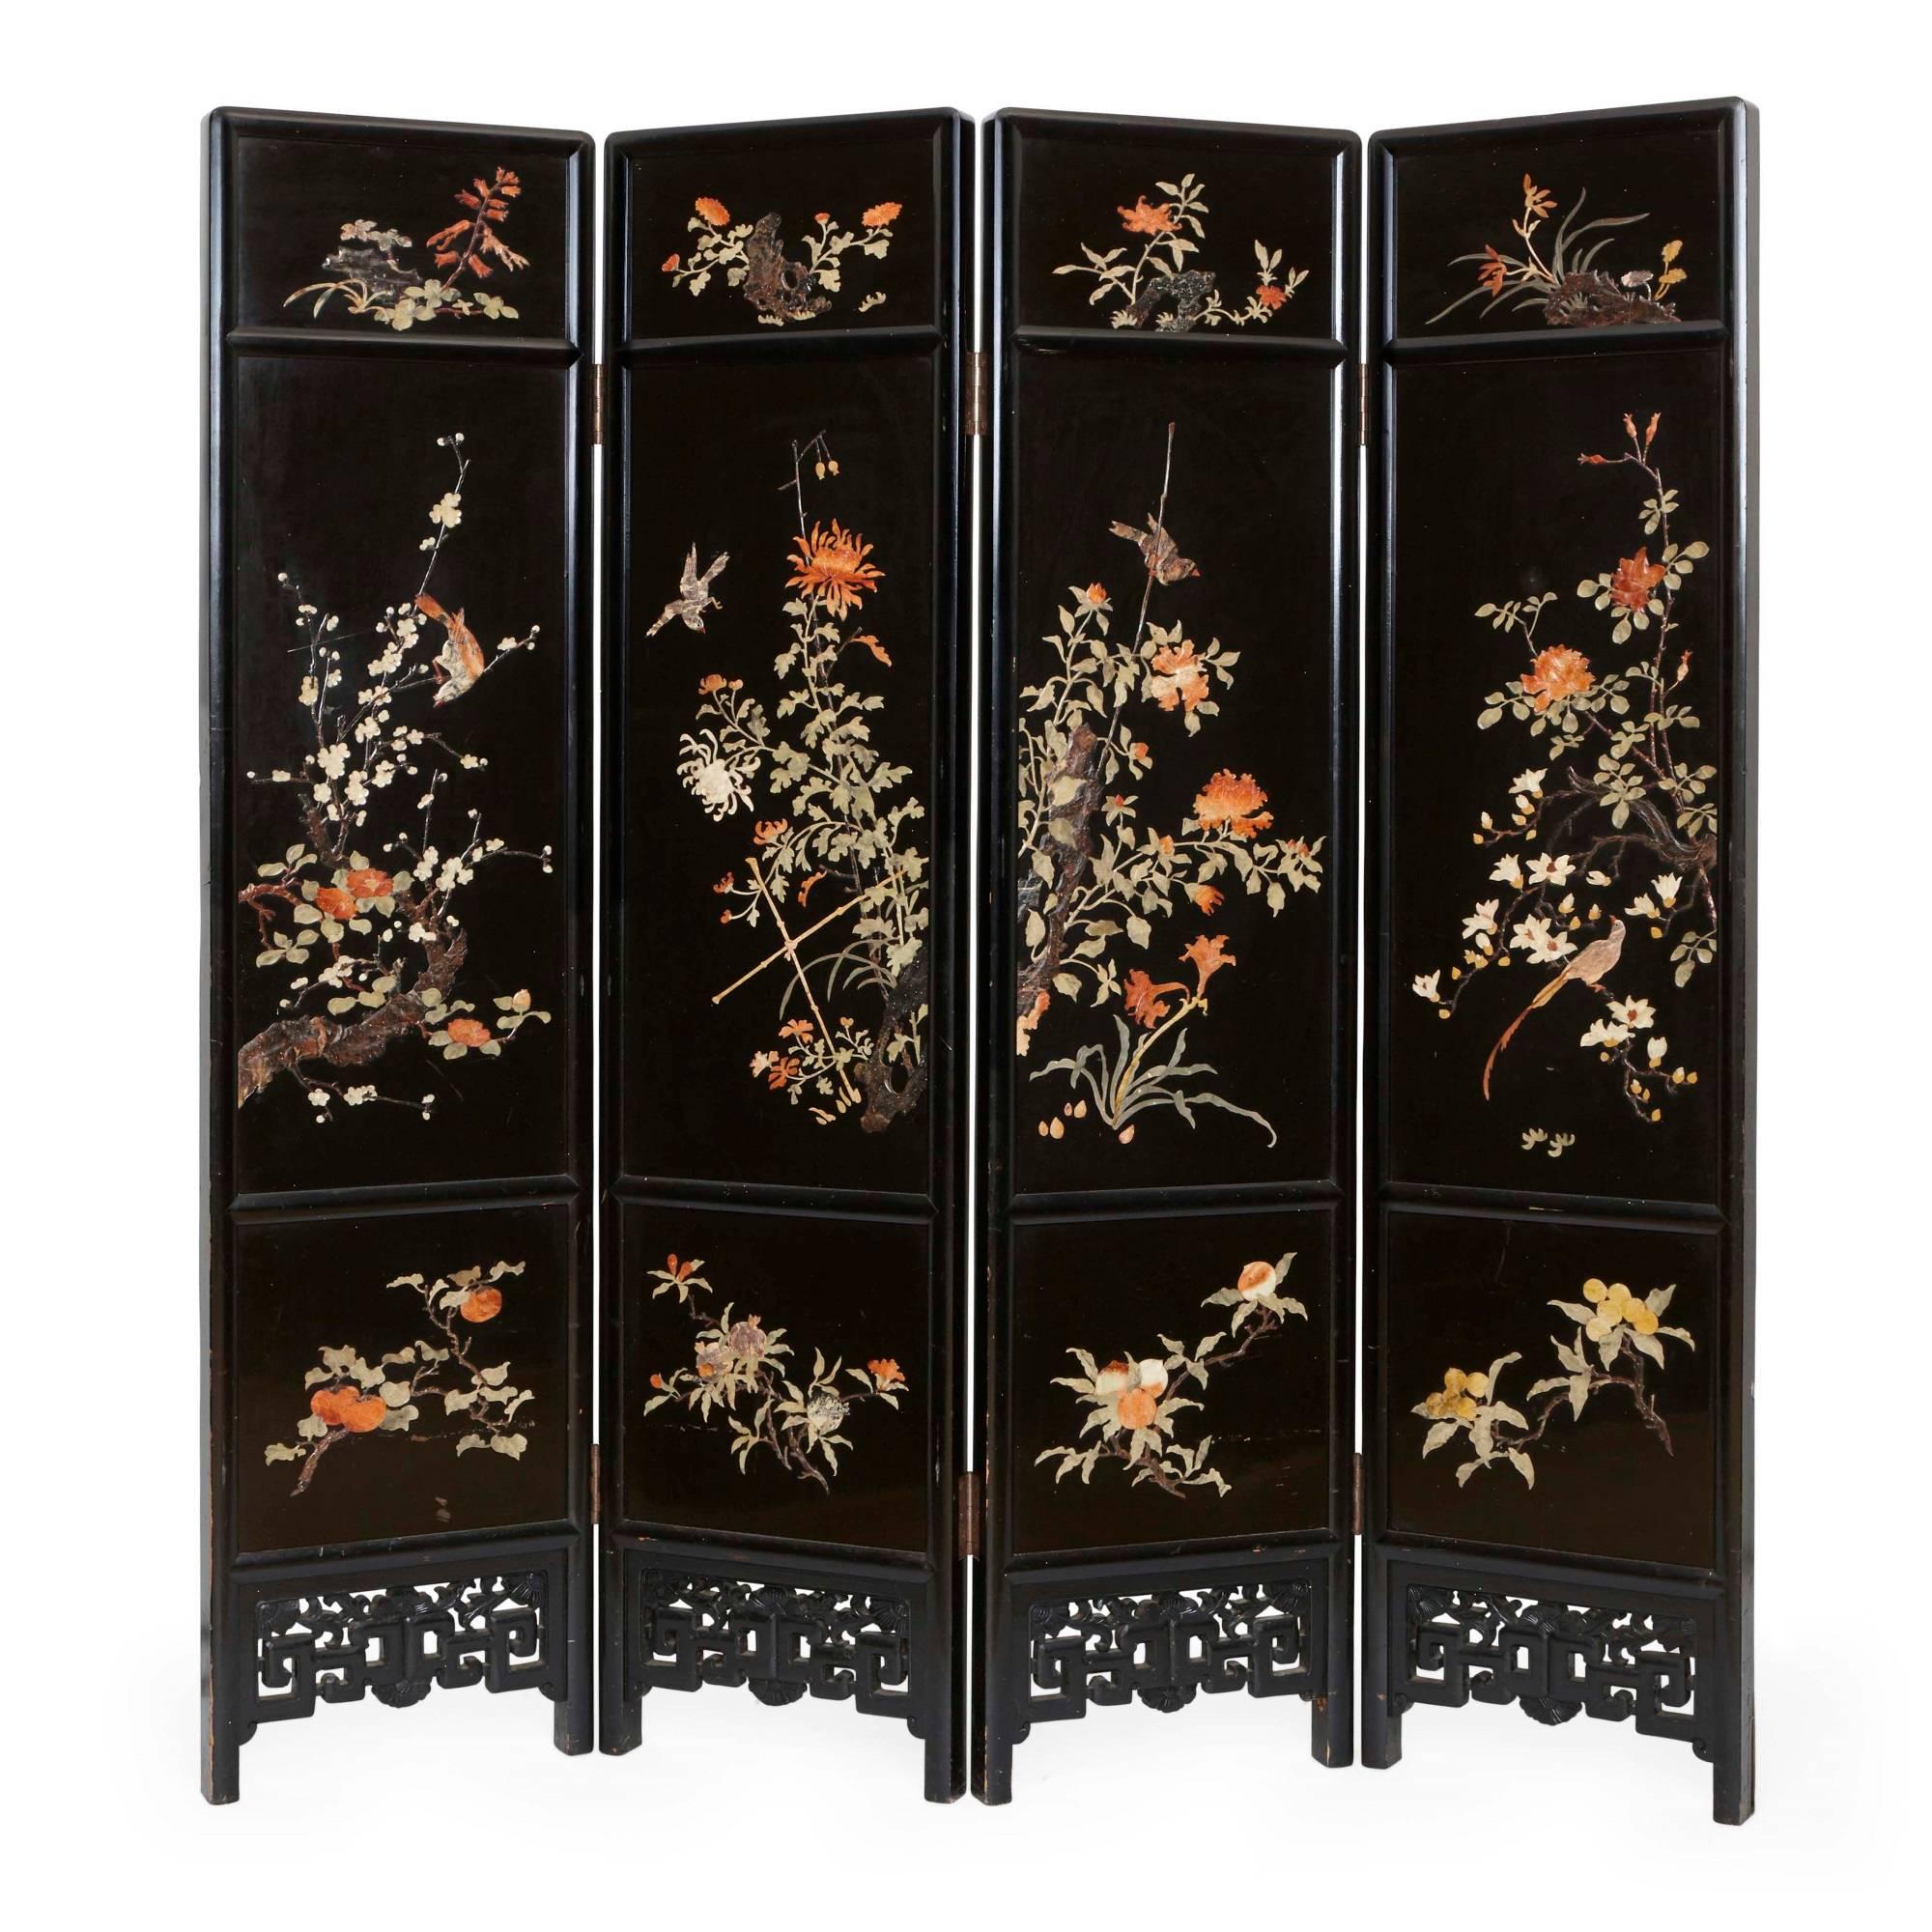 This stunning antique Chinese folding screen is of typical form, with four ebonized wood panels. On the front, each panel is delicately inlaid with soapstones in orange, green, blue and cream colors. The soapstone embellishments depict delicate